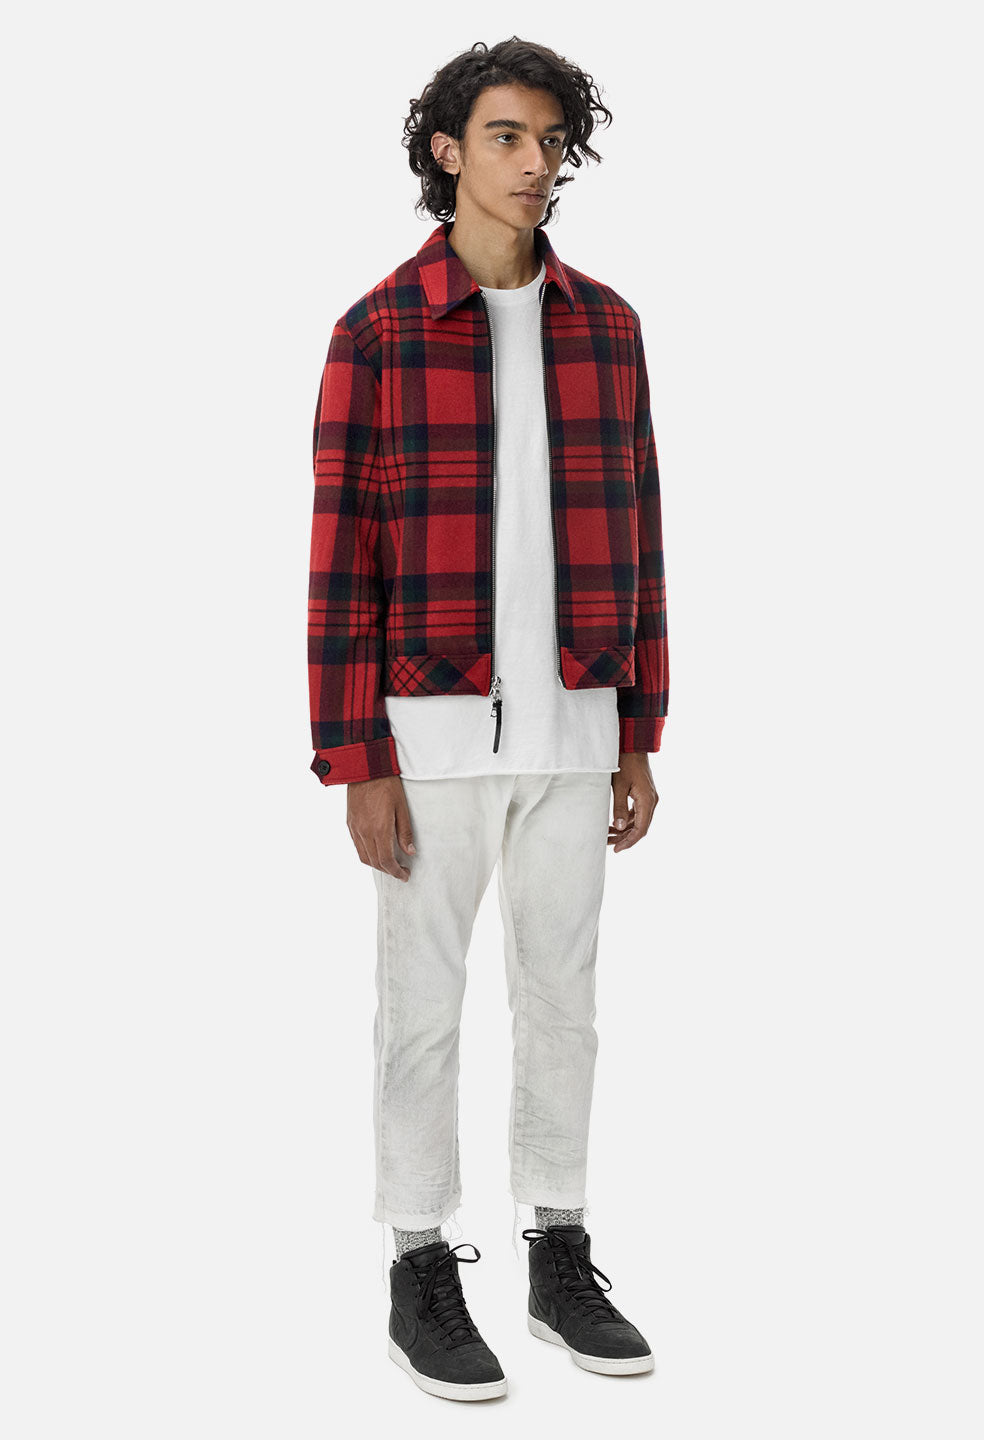 Lalunz / Red jacket flannel